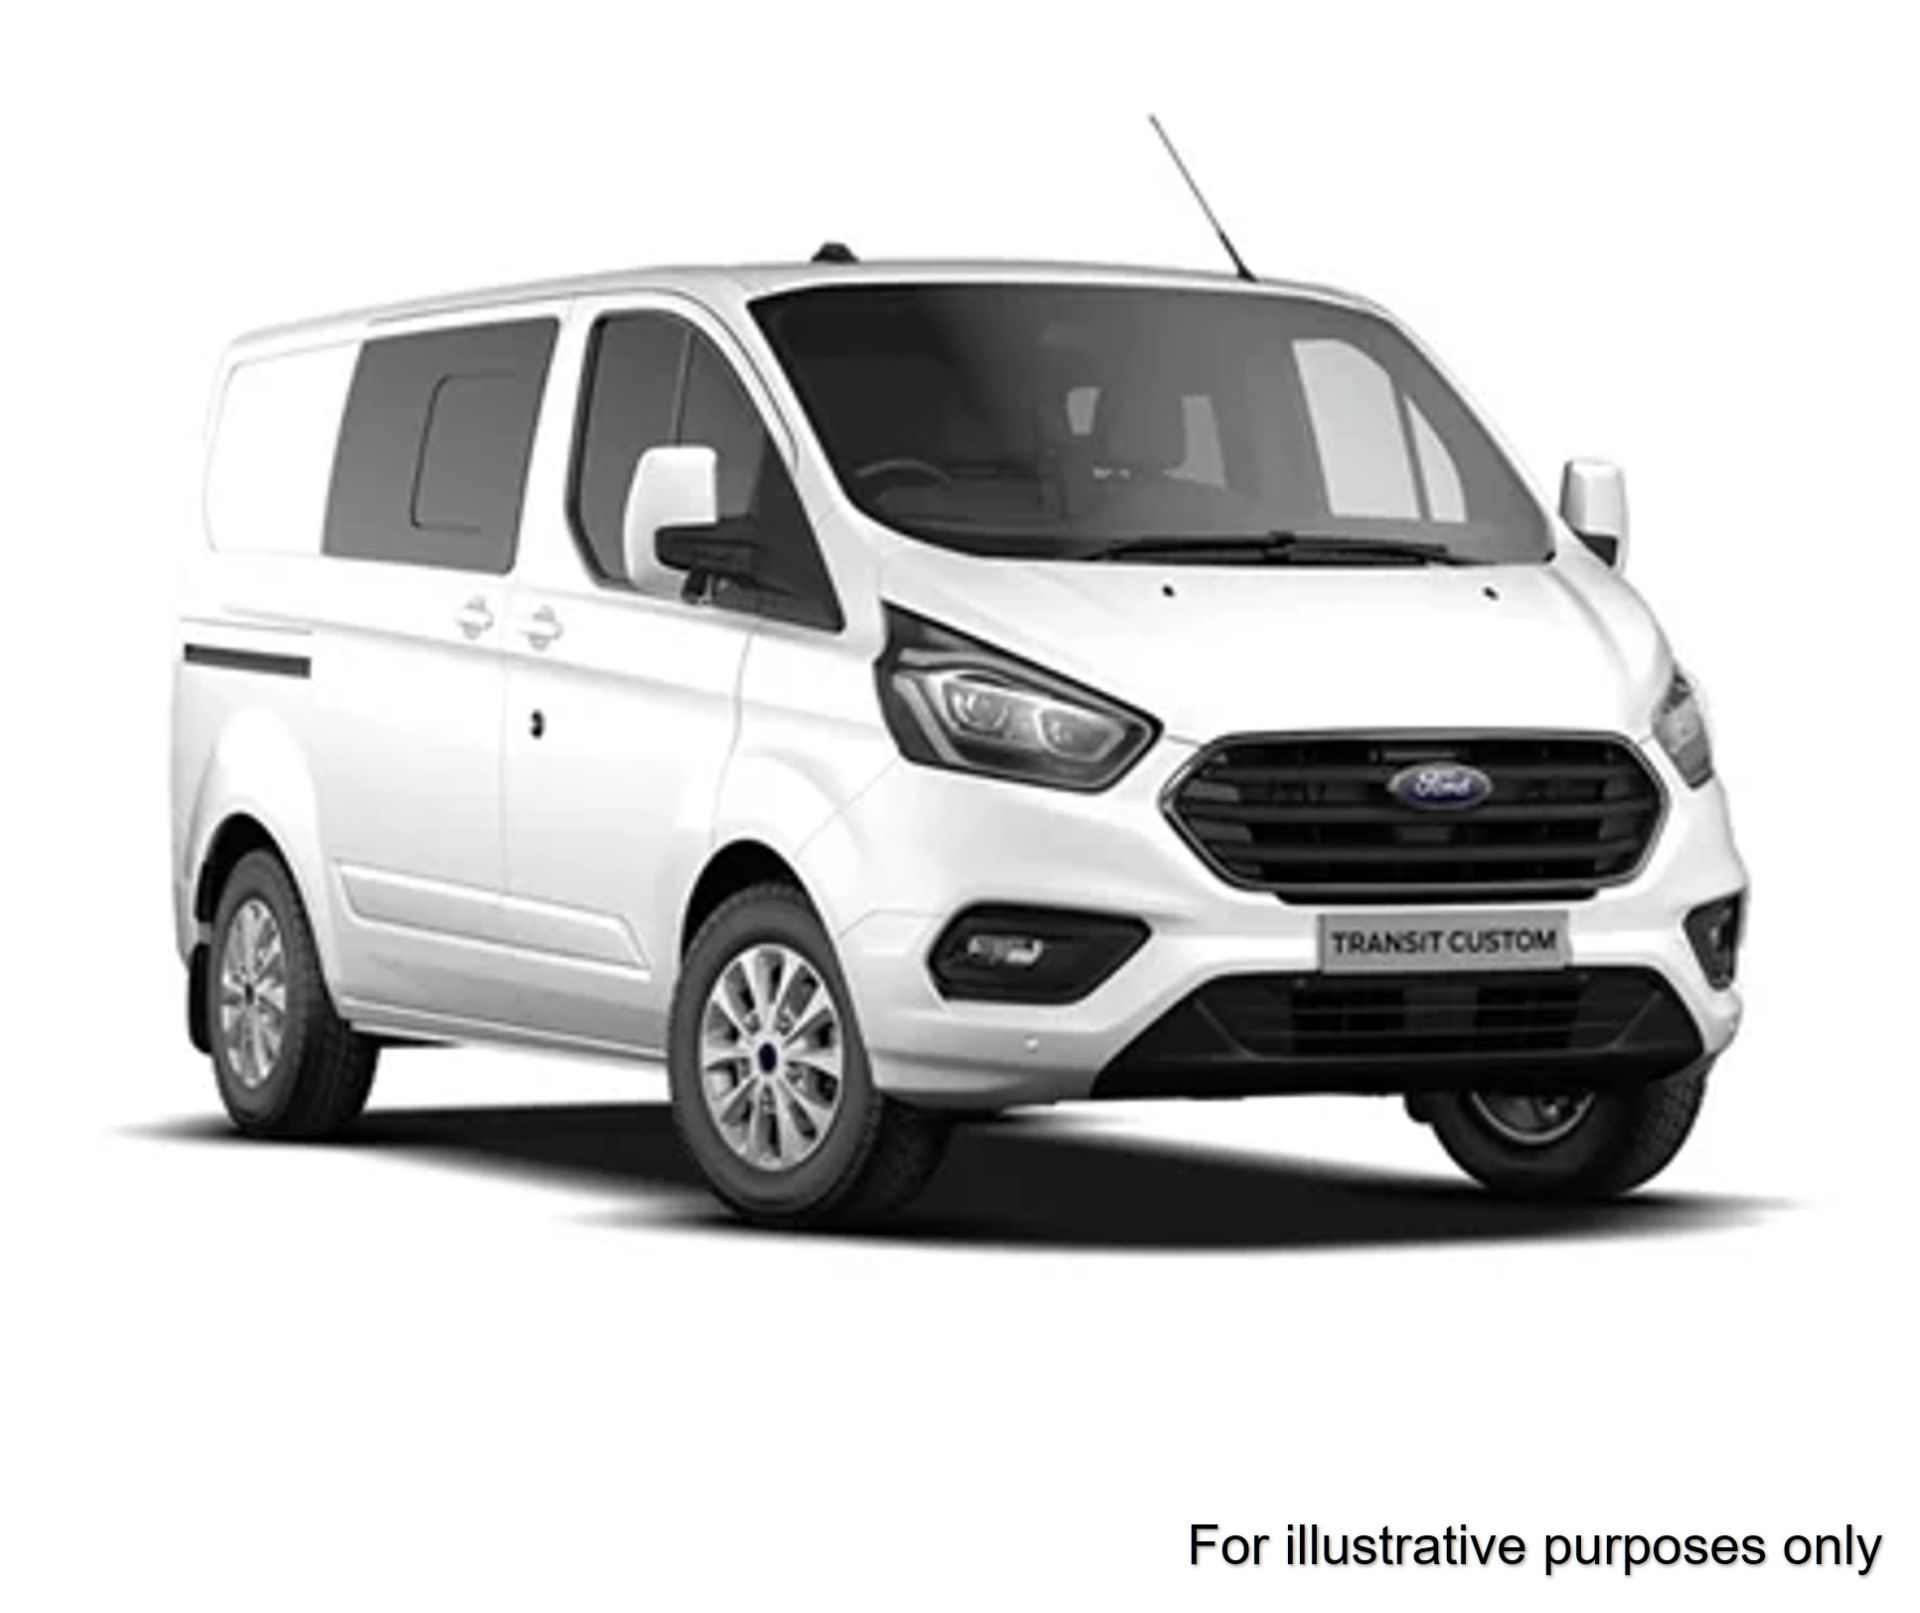 2019 Ford Transit Custom 2.0 Tdci 105Ps Low Roof D/Cab Van (FH19WHD)